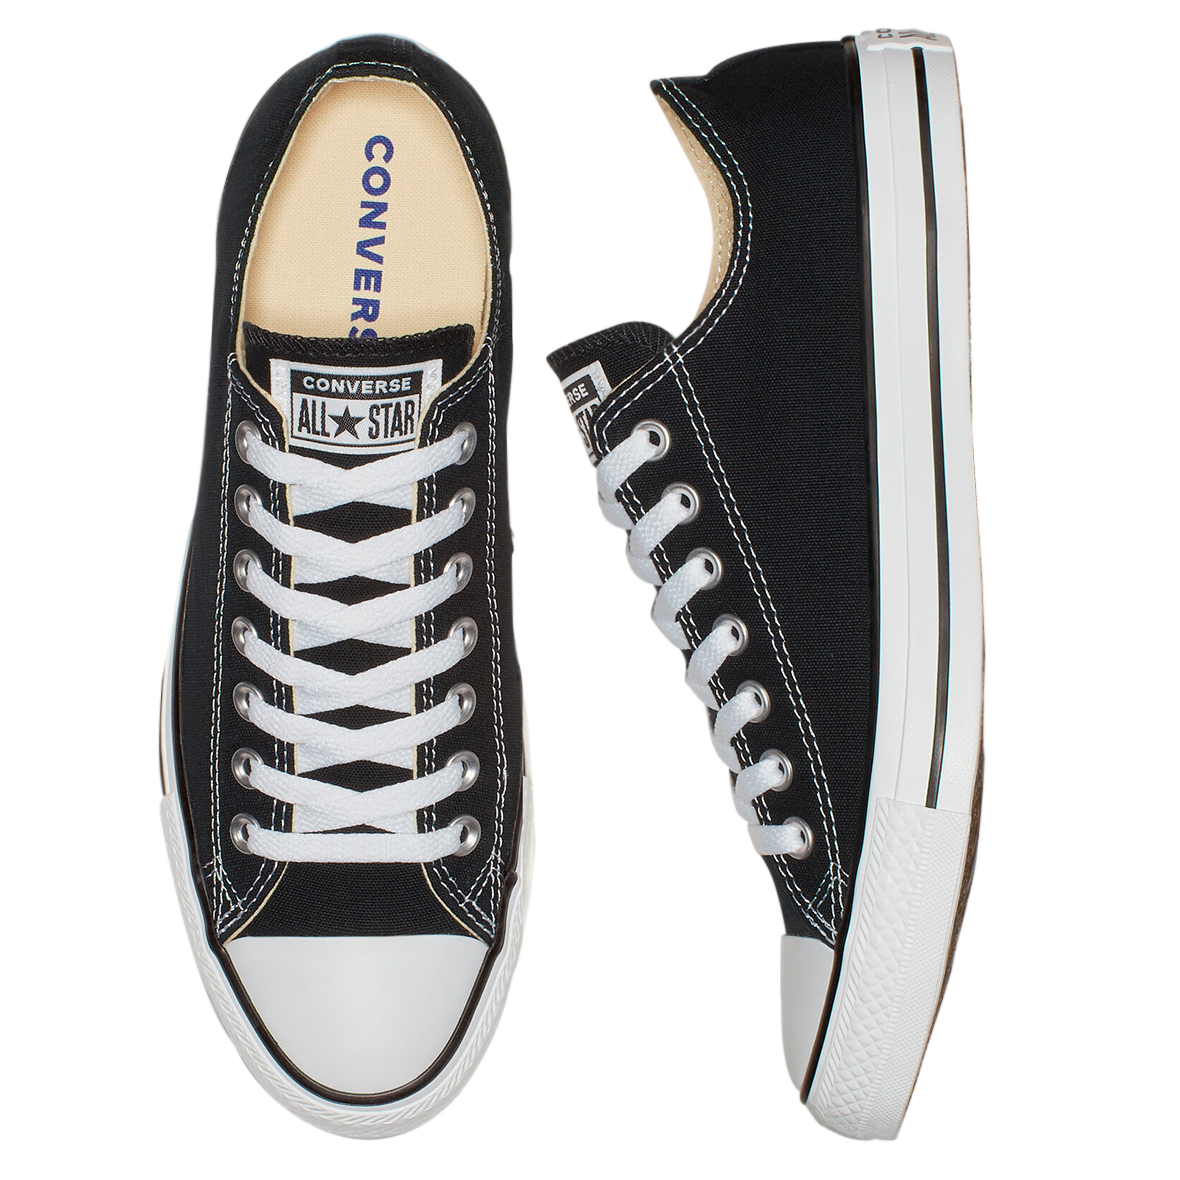 TENIS CONVERSE CHUCK TAYLOR ALL STAR UNISEX COLOR NEGRO